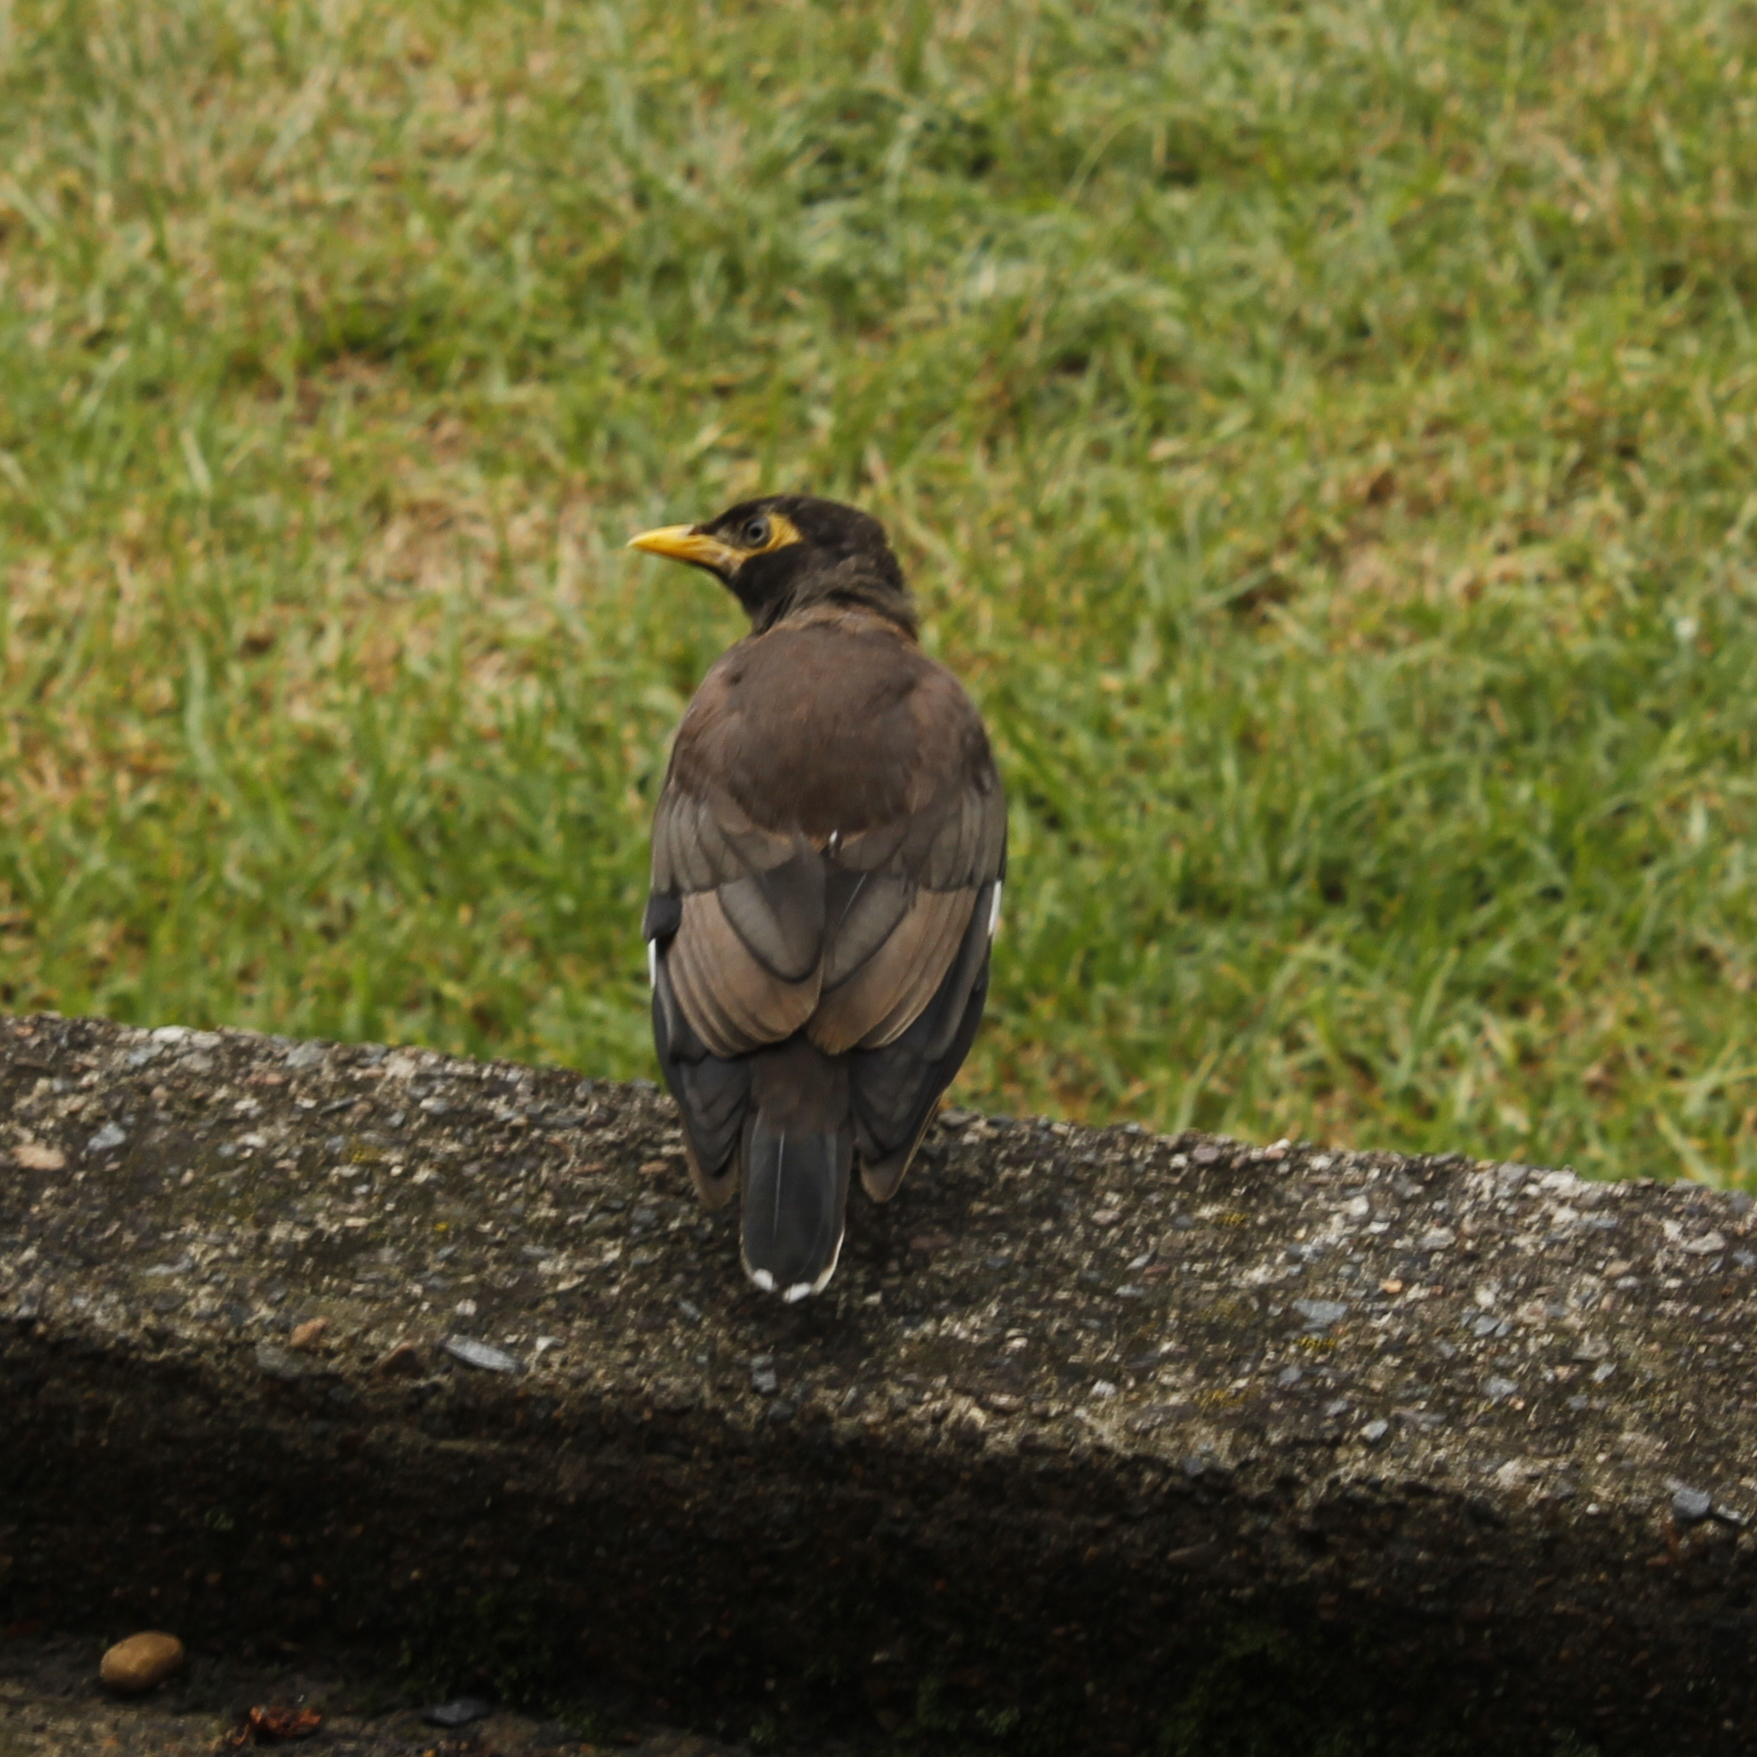 A bird called an Indian Mynah, an invasive species, seen from behind with its head turned to the left and blurred grass in the background, sits on a concrete gutter. Its feathers are shades of brown, with a thin white band at the tip of its tail and another on the edge of each wing. The head and neck are dark brown, with a yellow mask around its eye linked up to a pointy yellow beak.